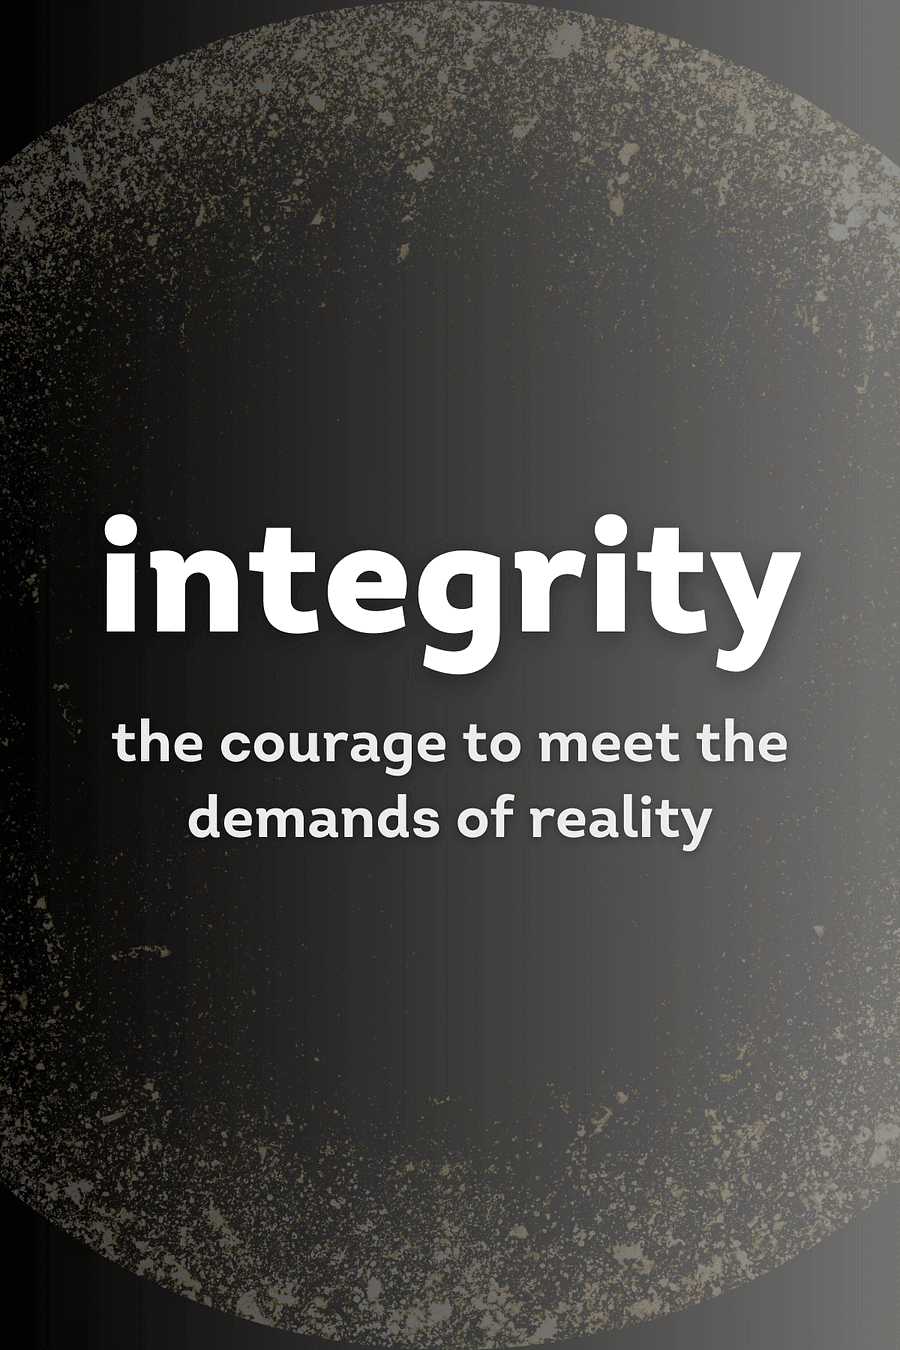 Integrity by Henry Cloud - Book Summary